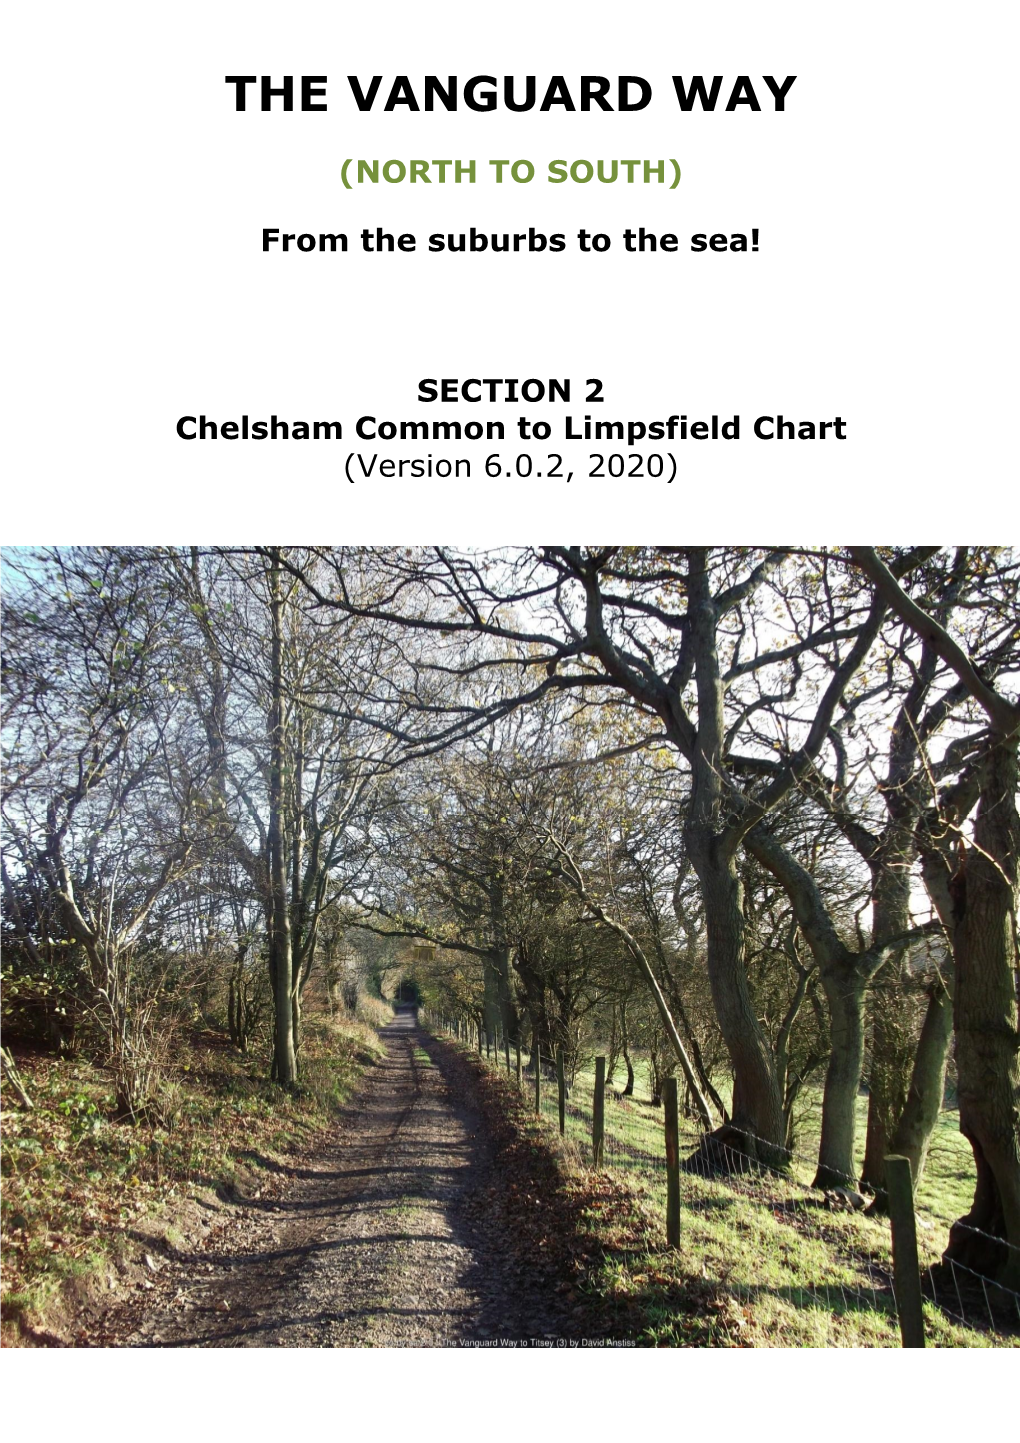 SECTION 2 Chelsham Common to Limpsfield Chart (Version 6.0.2, 2020) the VANGUARD WAY